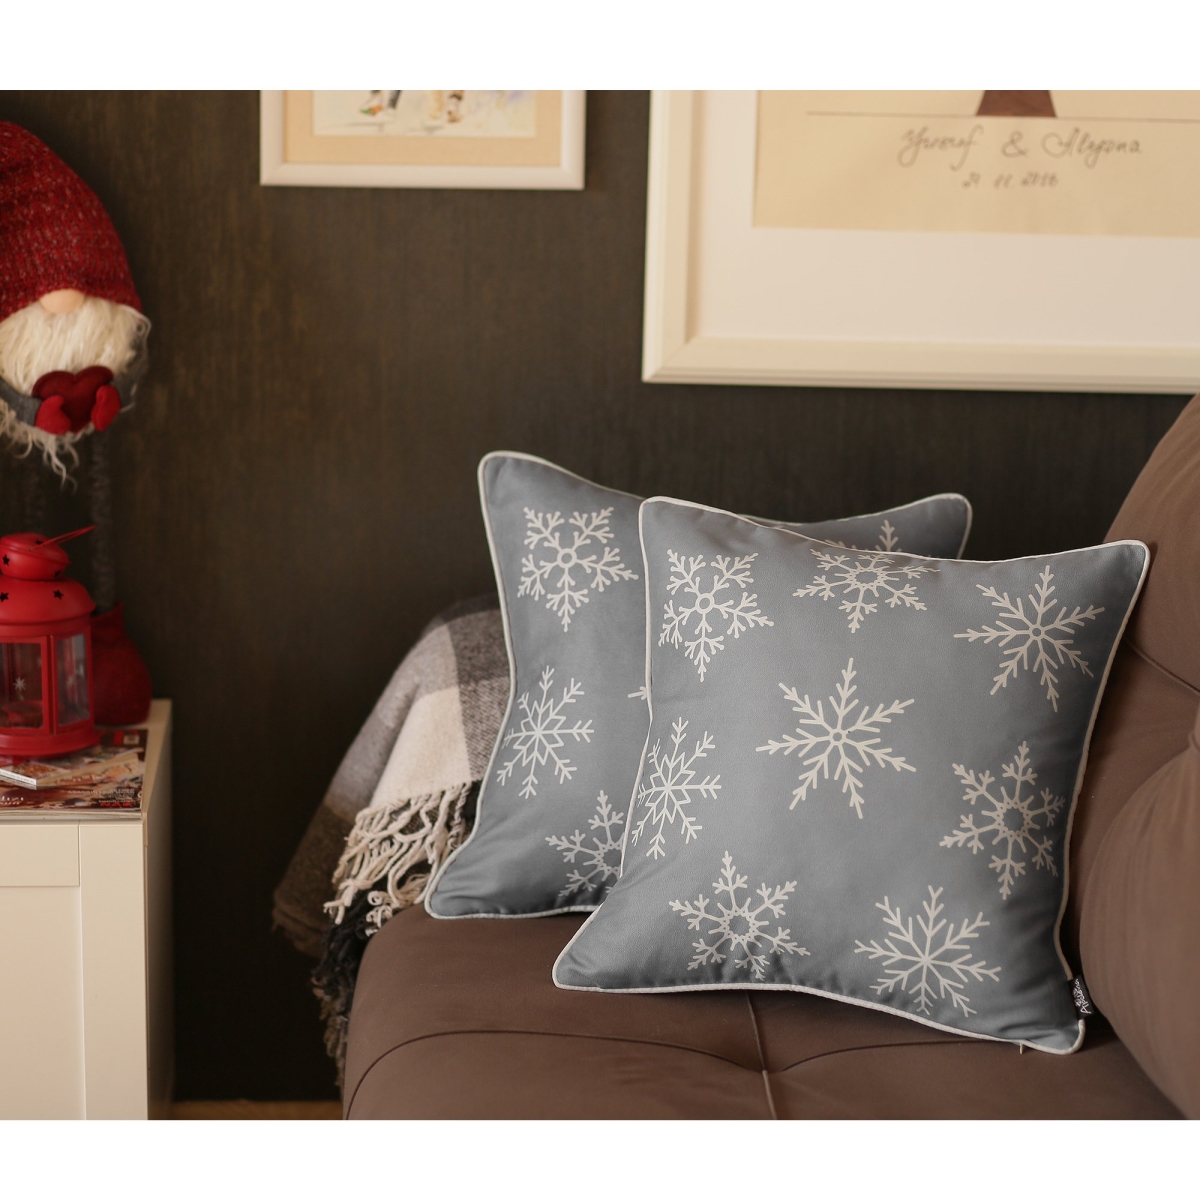 Picture of HomeRoots 376860 18 in. Christmas Snowflakes Throw Pillow Cover in Gray - Set of 4